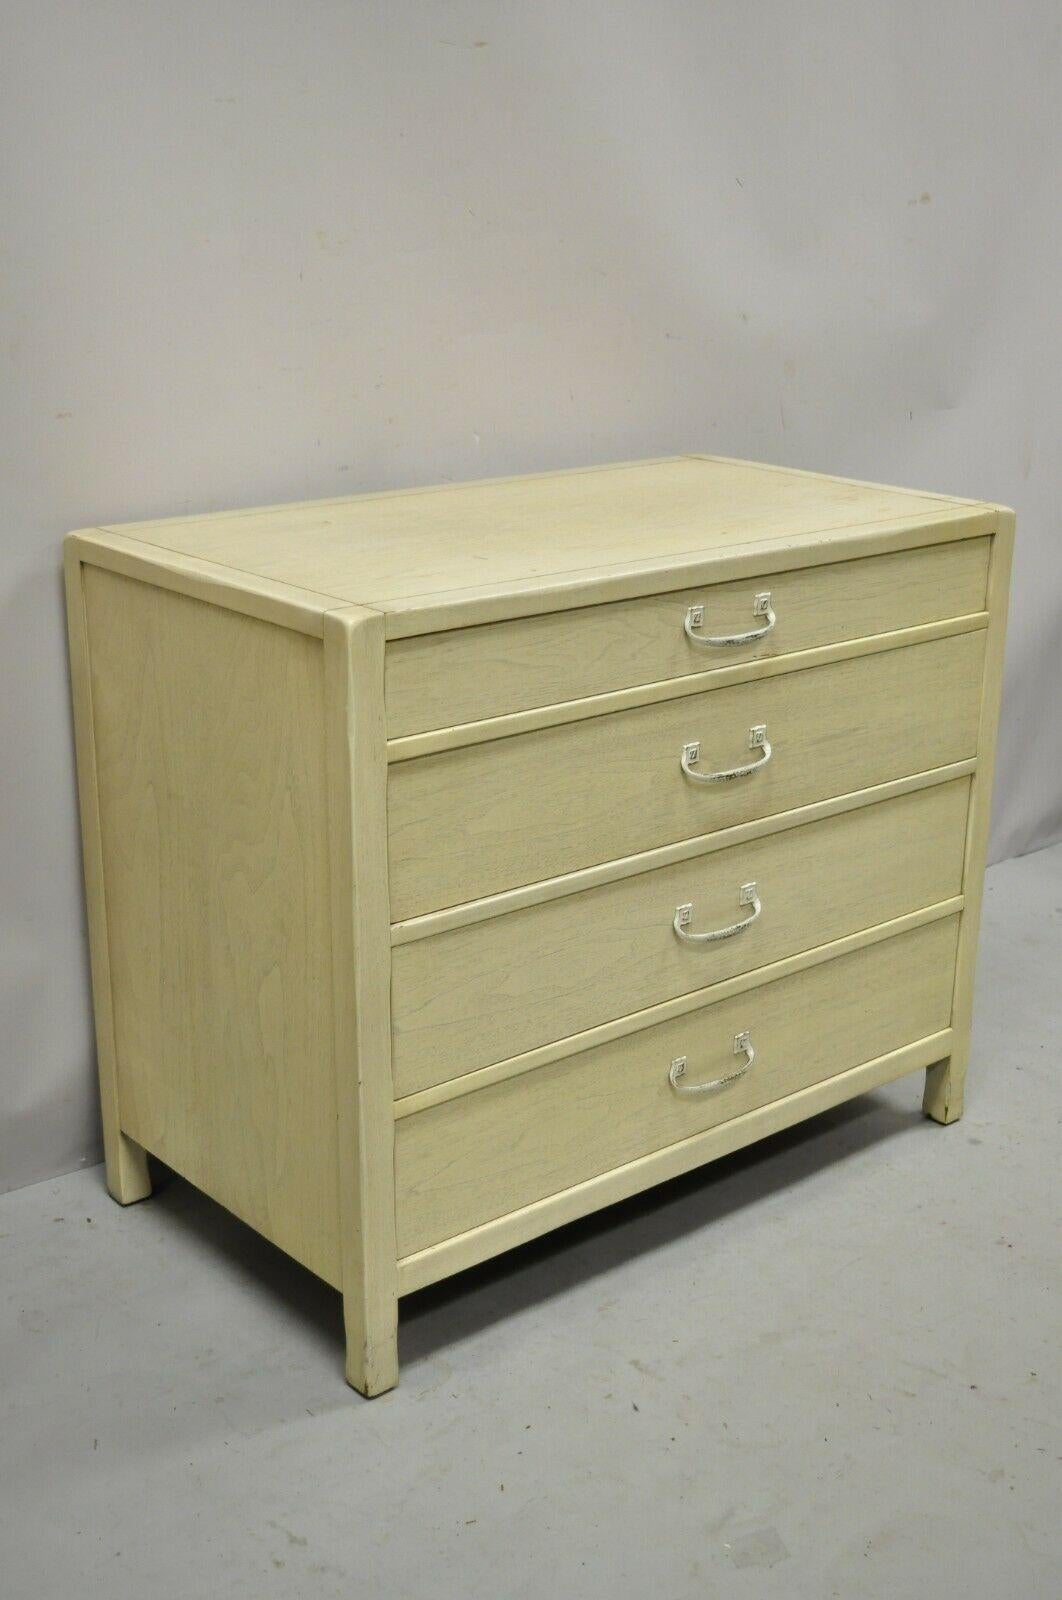 Sligh Vintage Mid Century Modern 4 Drawer Painted Cerused Bachelor Chest Dresser. Item features a cerused distressed finish, 4 dovetailed drawers, solid brass hardware, very nice vintage item, clean modernist lines, quality American craftsmanship.